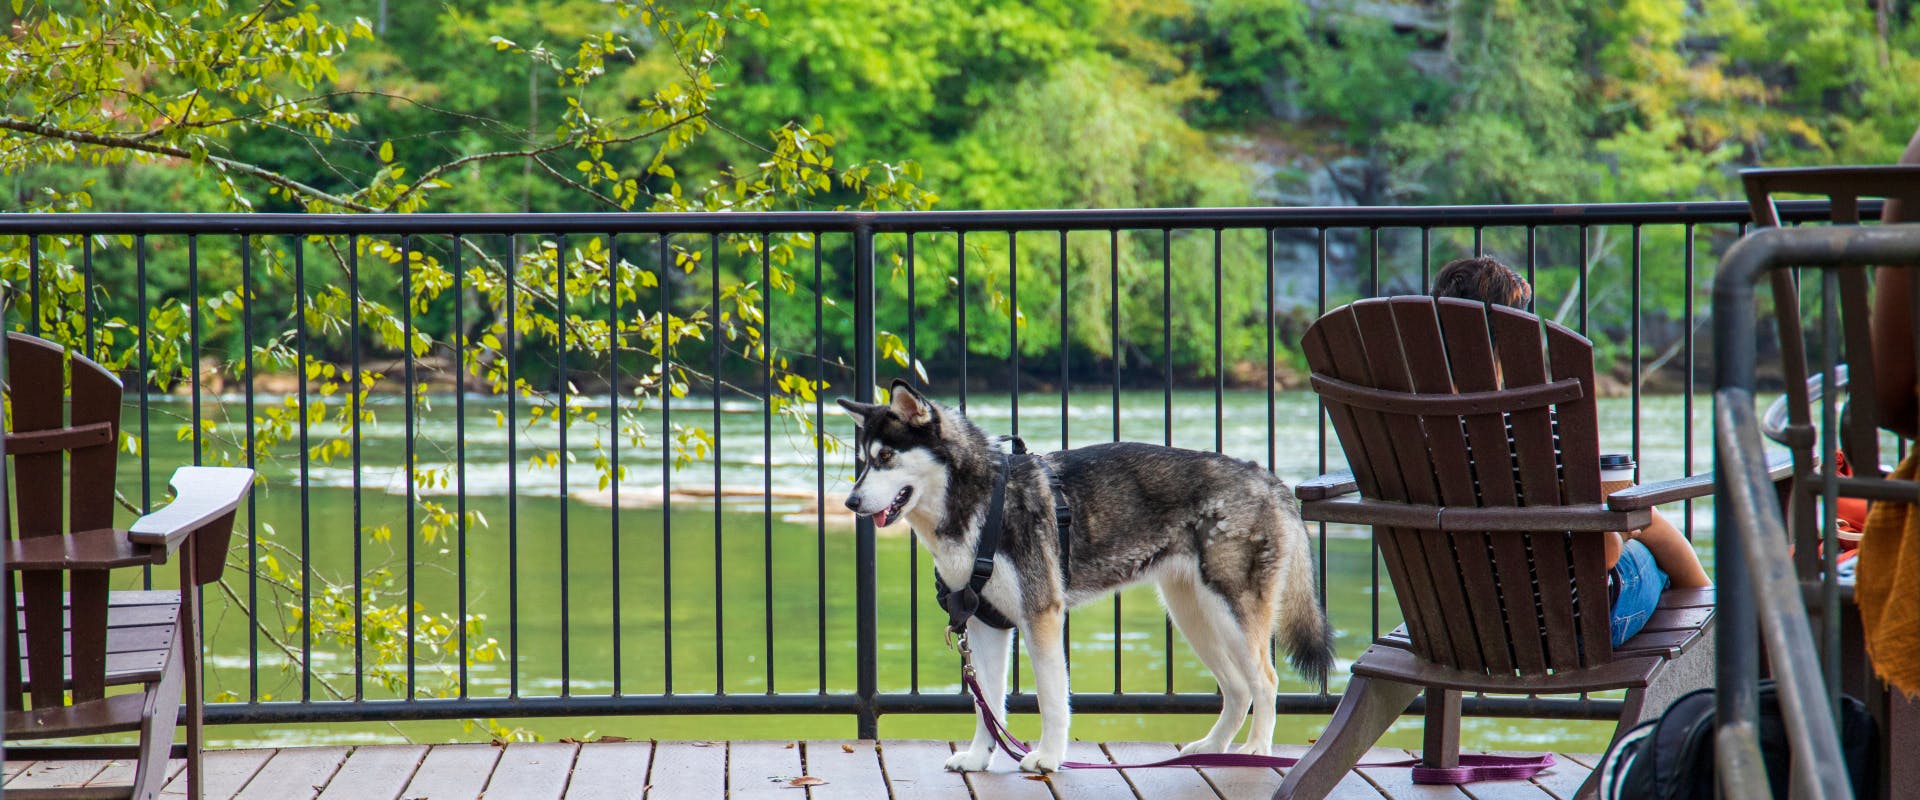 husky stood on an outdoor pet-friendly patio by a lake